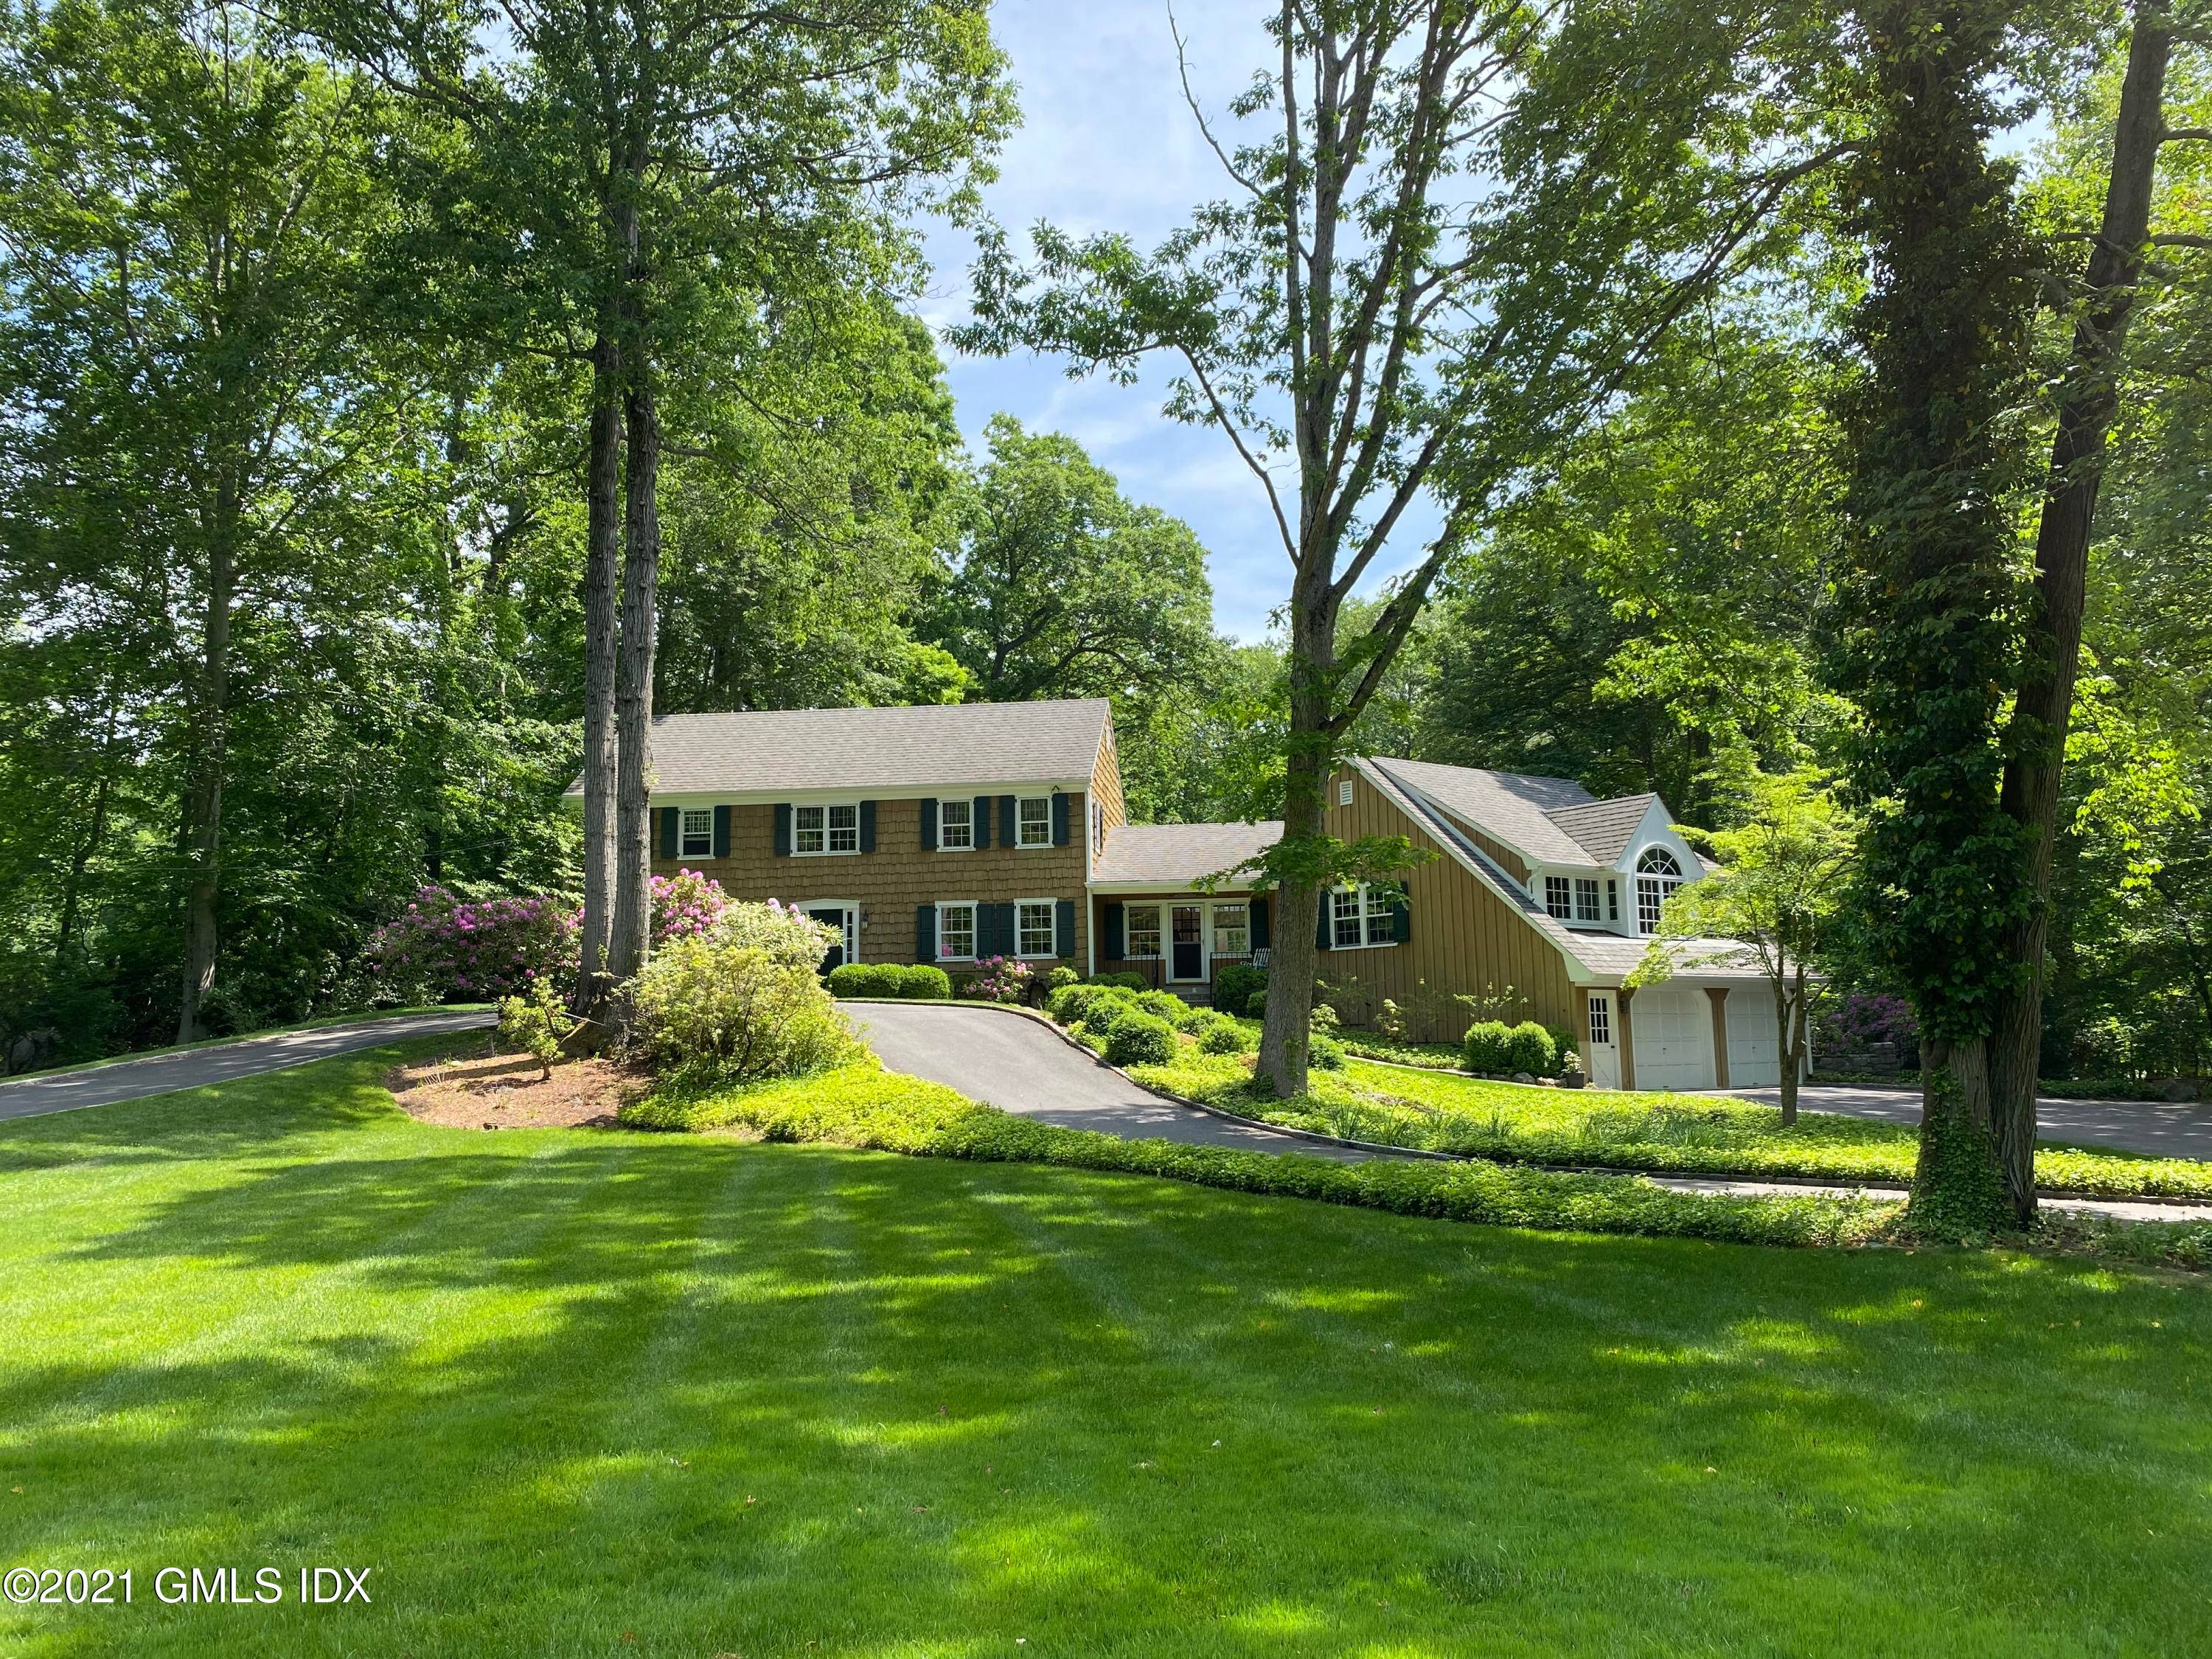 MOTIVATED SELLER ! 5 bedroom colonial located in prime mid country with sprawling front green level lawn and flat level yard.